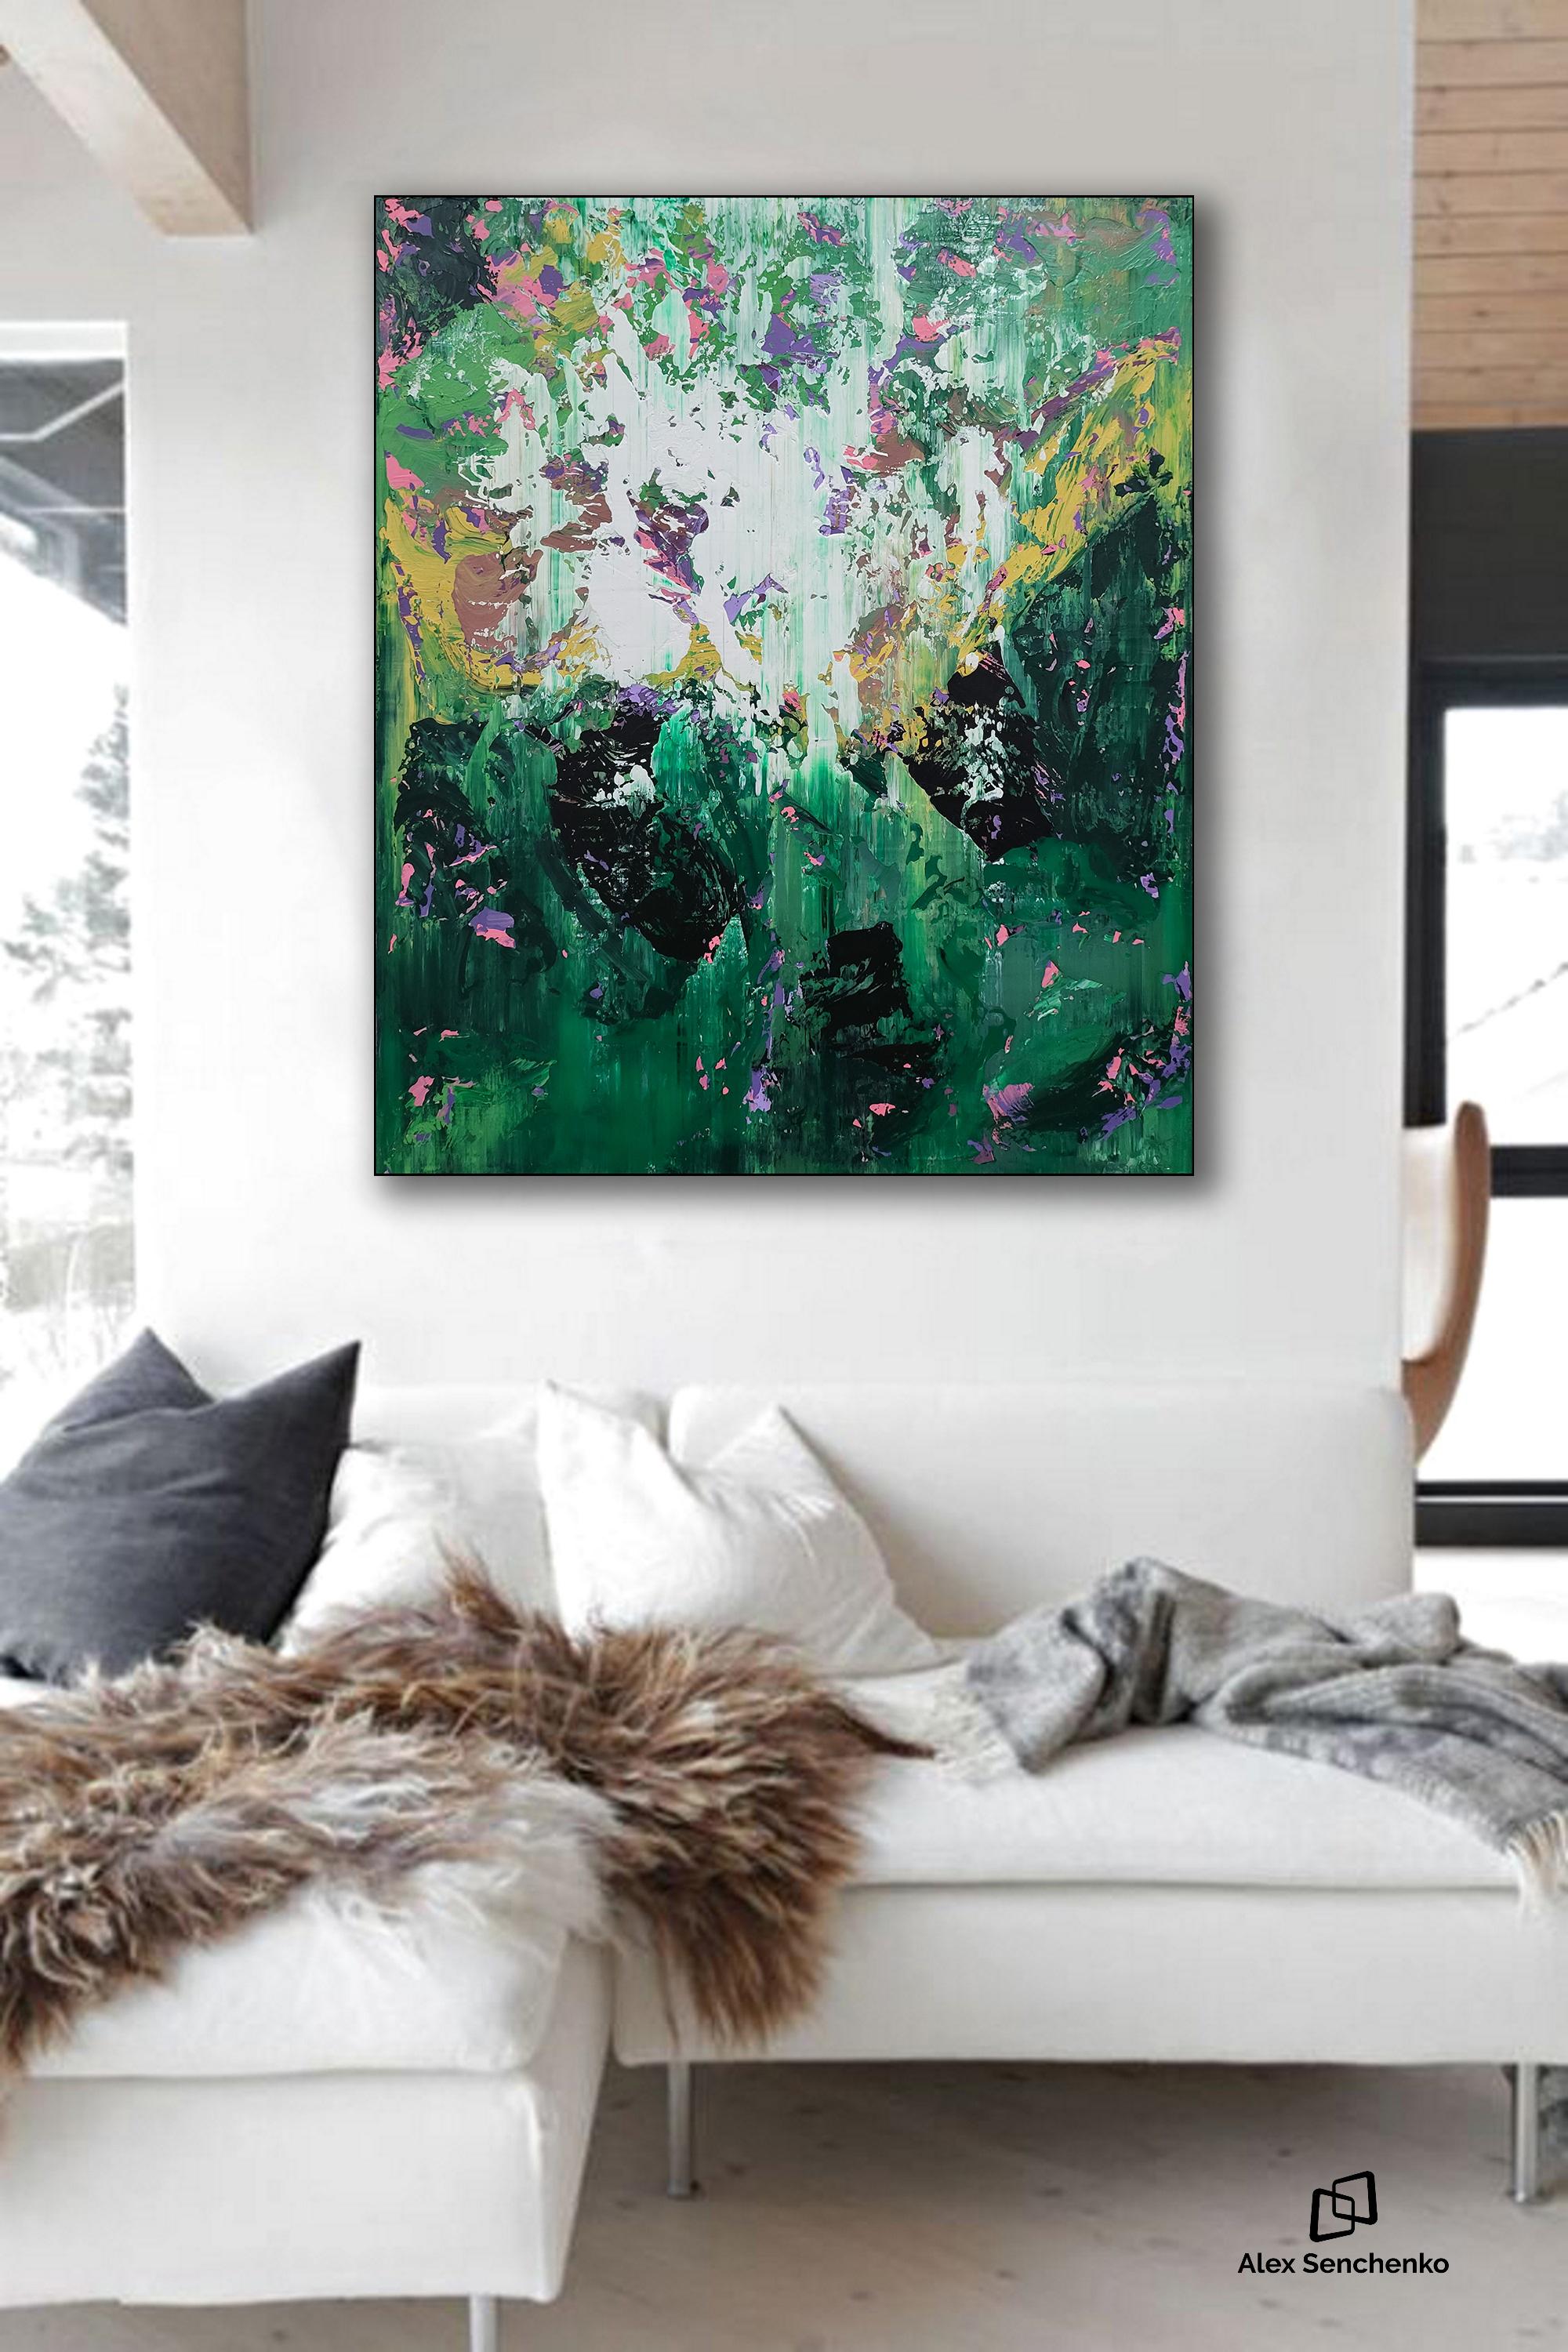 There’s something different about the homes of creative people. They like to surround themselves with inspiring things, from unique tablecloths to the incredible paintings on the walls.
Alex Senchenko’s - Abstract 22169 - can give your home that